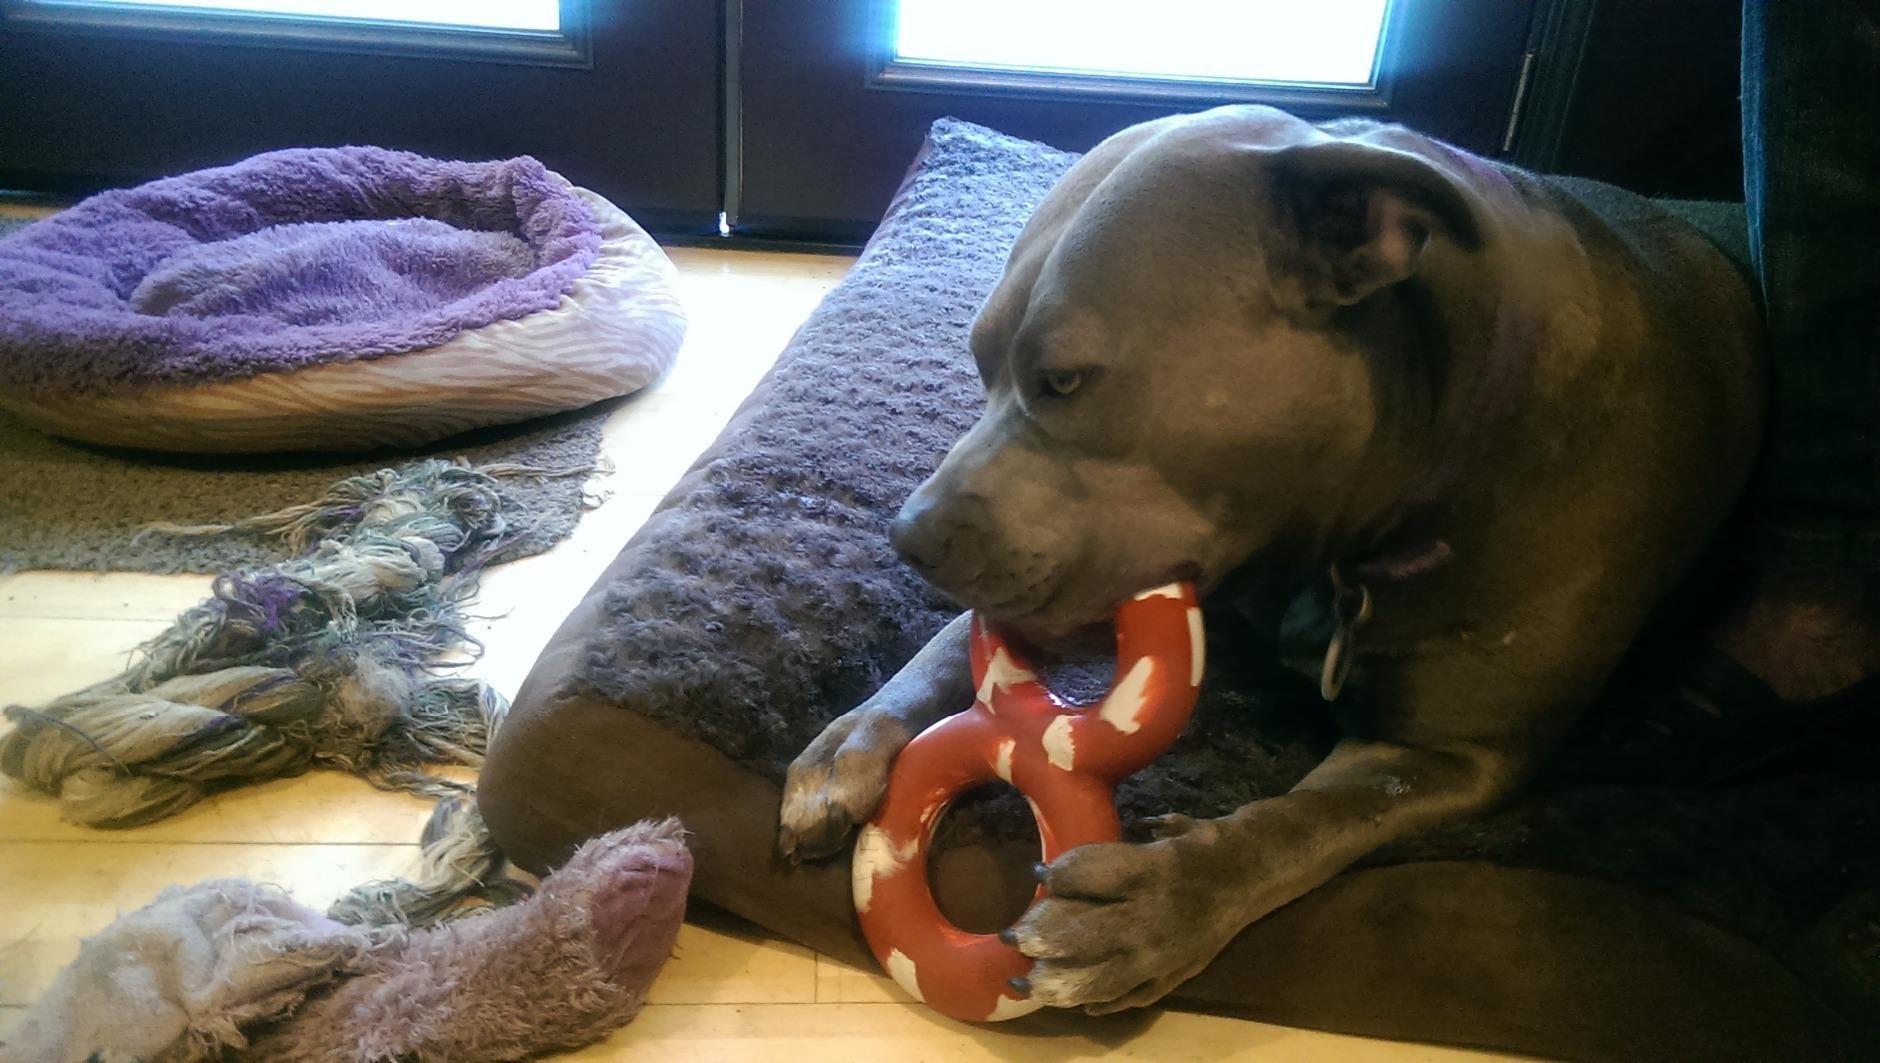 A pit bull chewing on the toy, which has a figure-8 shape